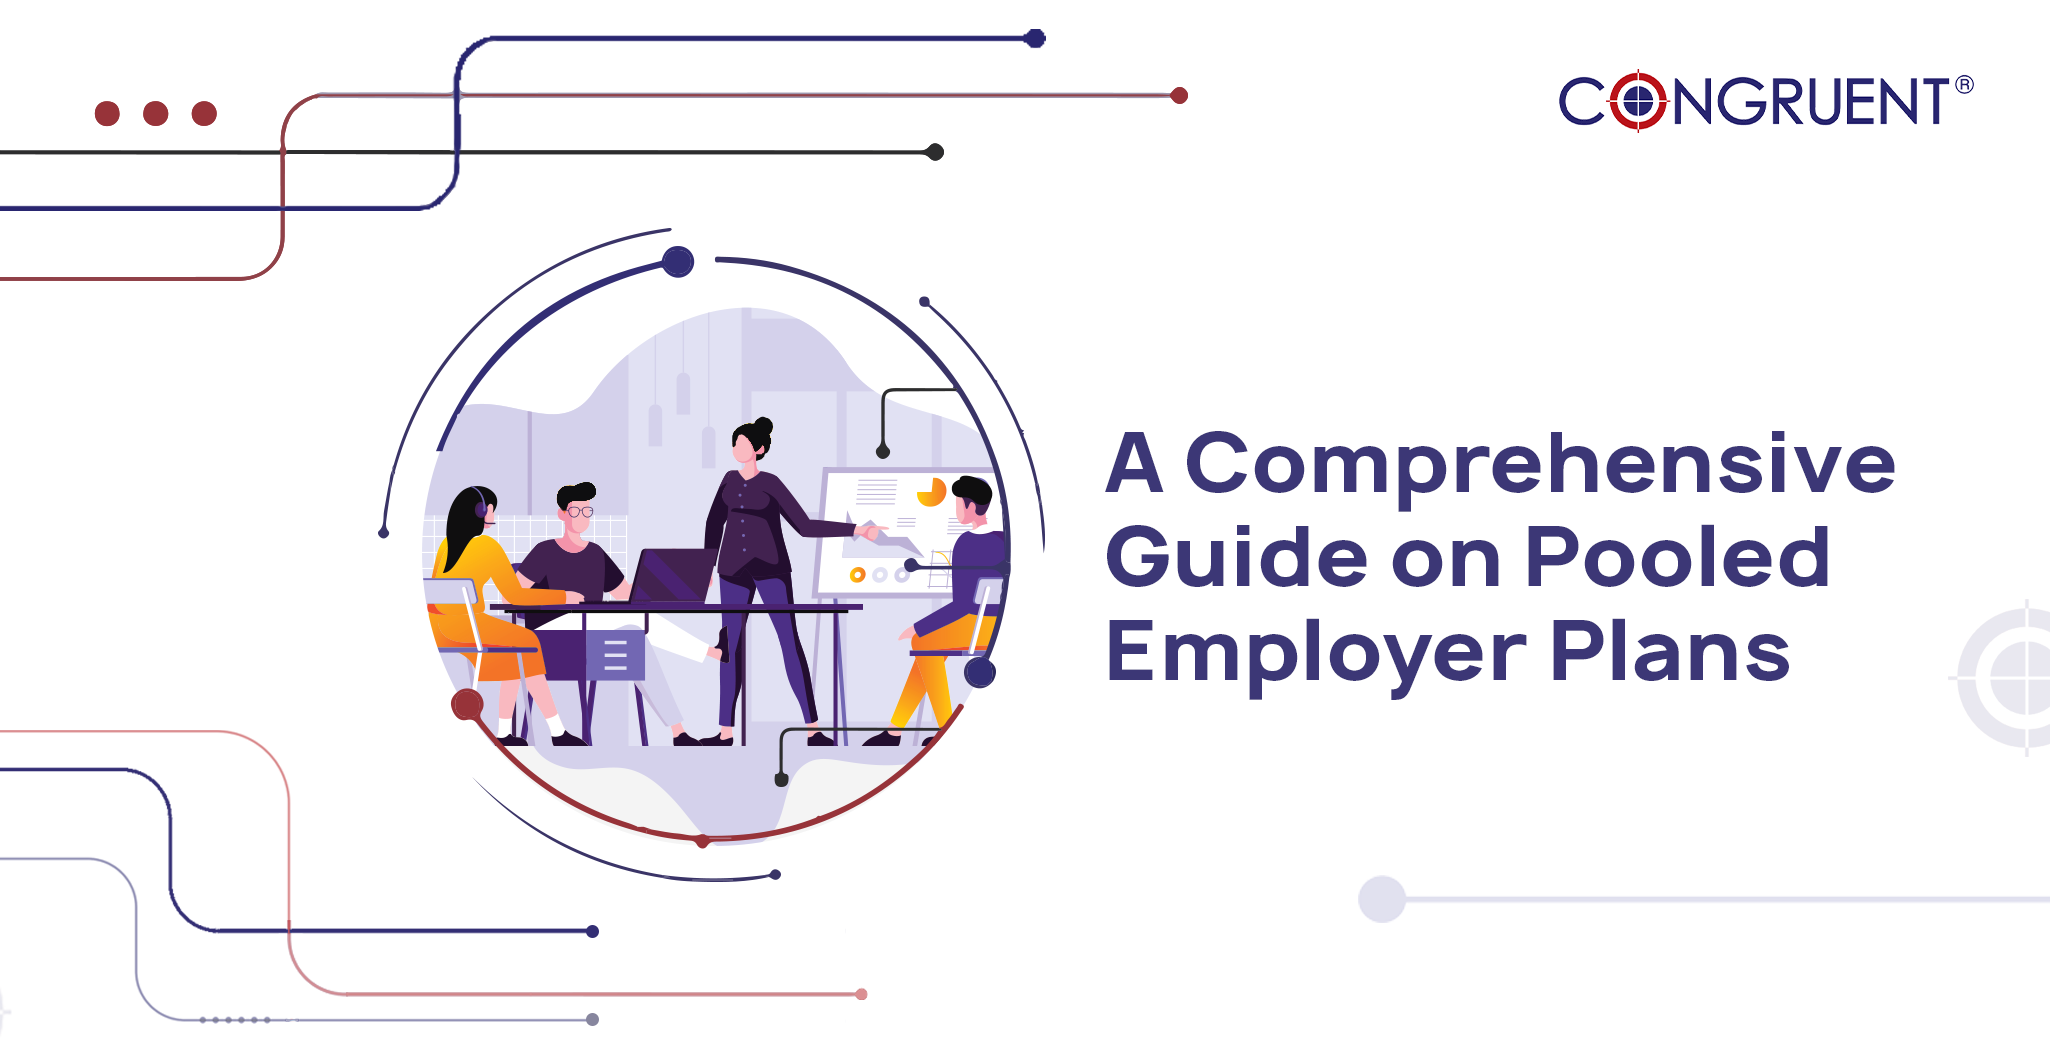 A Comprehensive Guide on Pooled Employer Plans